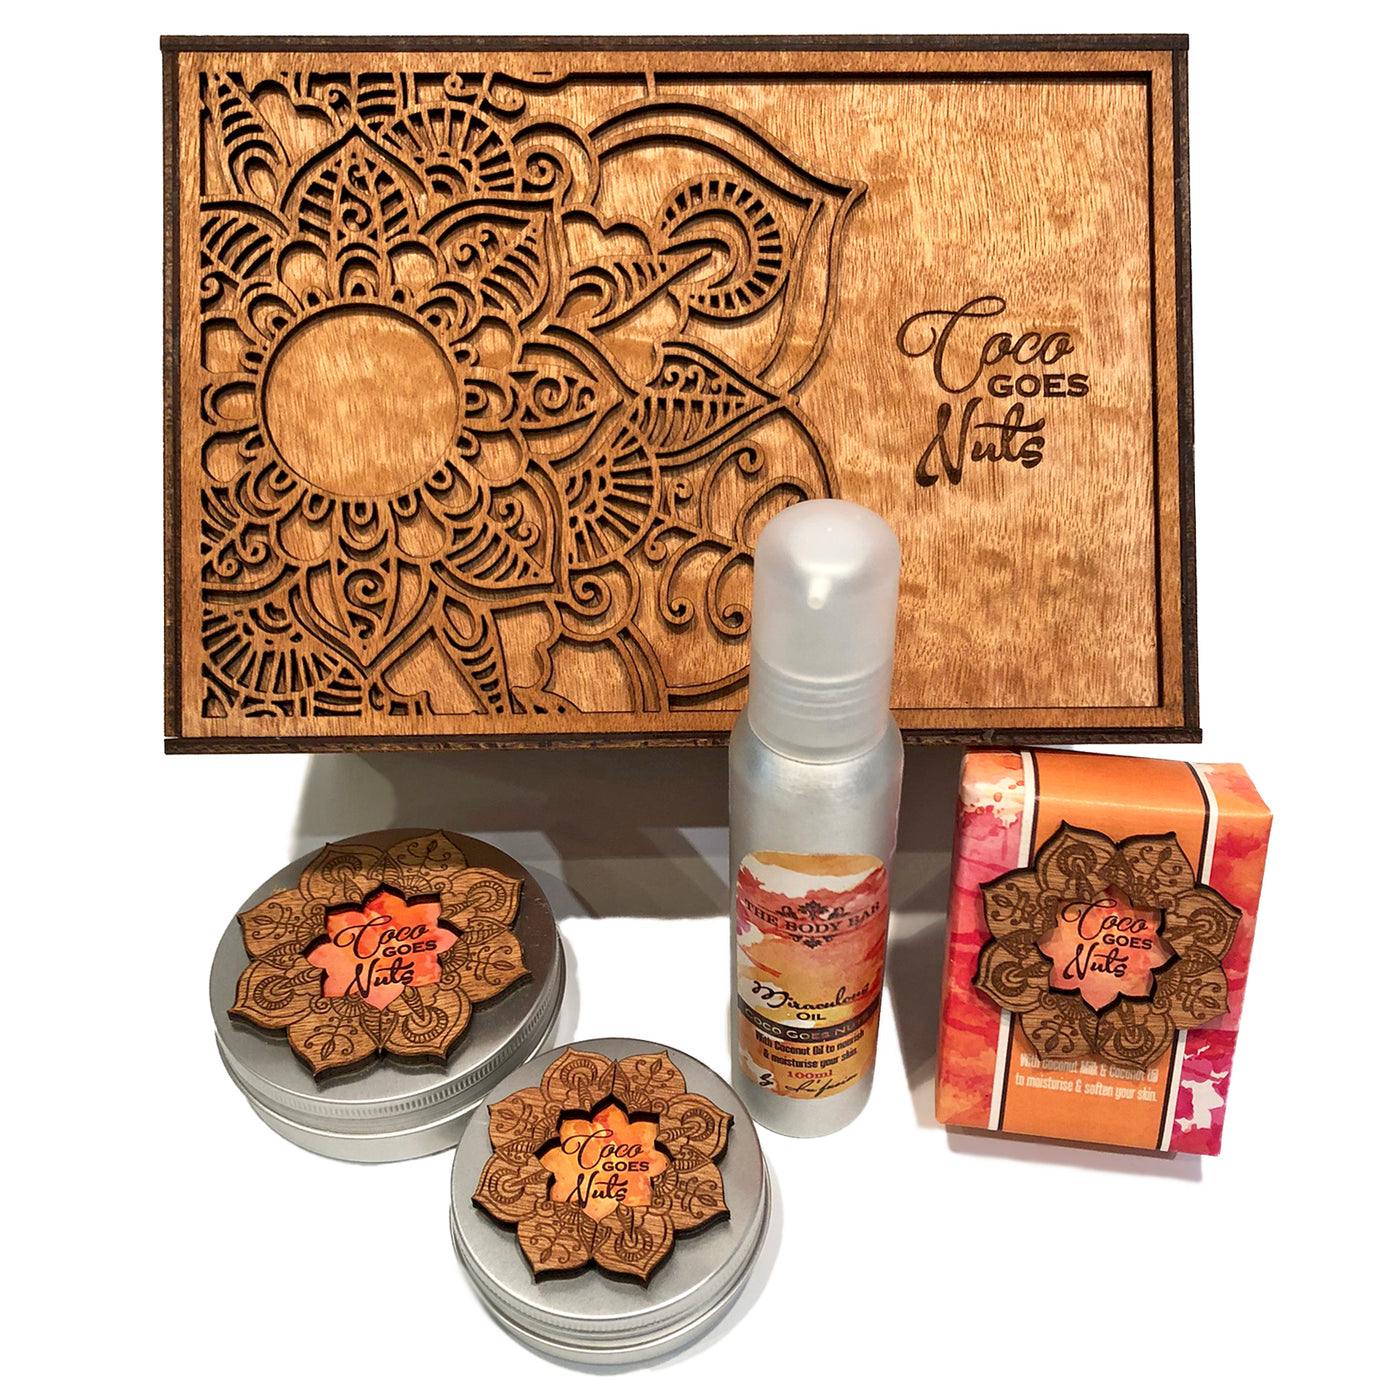 Coco-goes-Nuts-GiftBox-products-DodoMarket-delivery-Mauritius